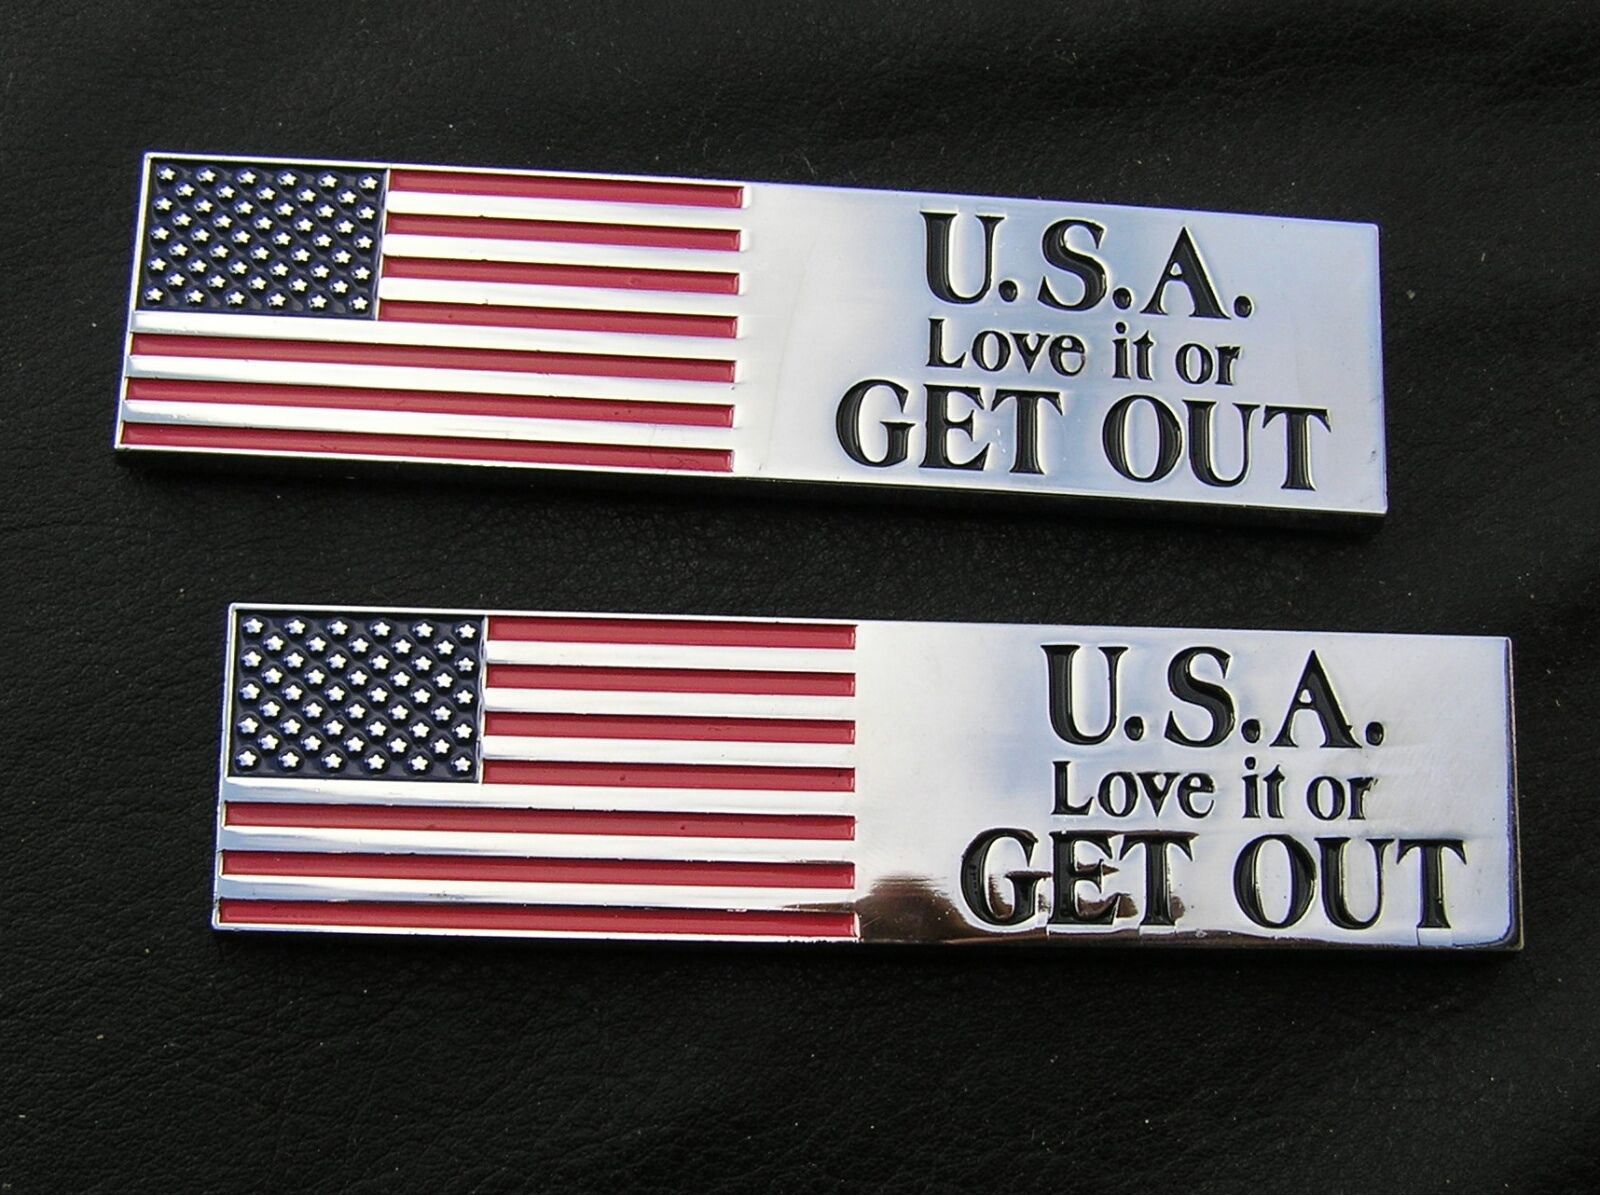 USA , LOVE IT OR GET OUT - PAIR CAR EMBLEMS Chrome Metal Fender Badges fits FORD